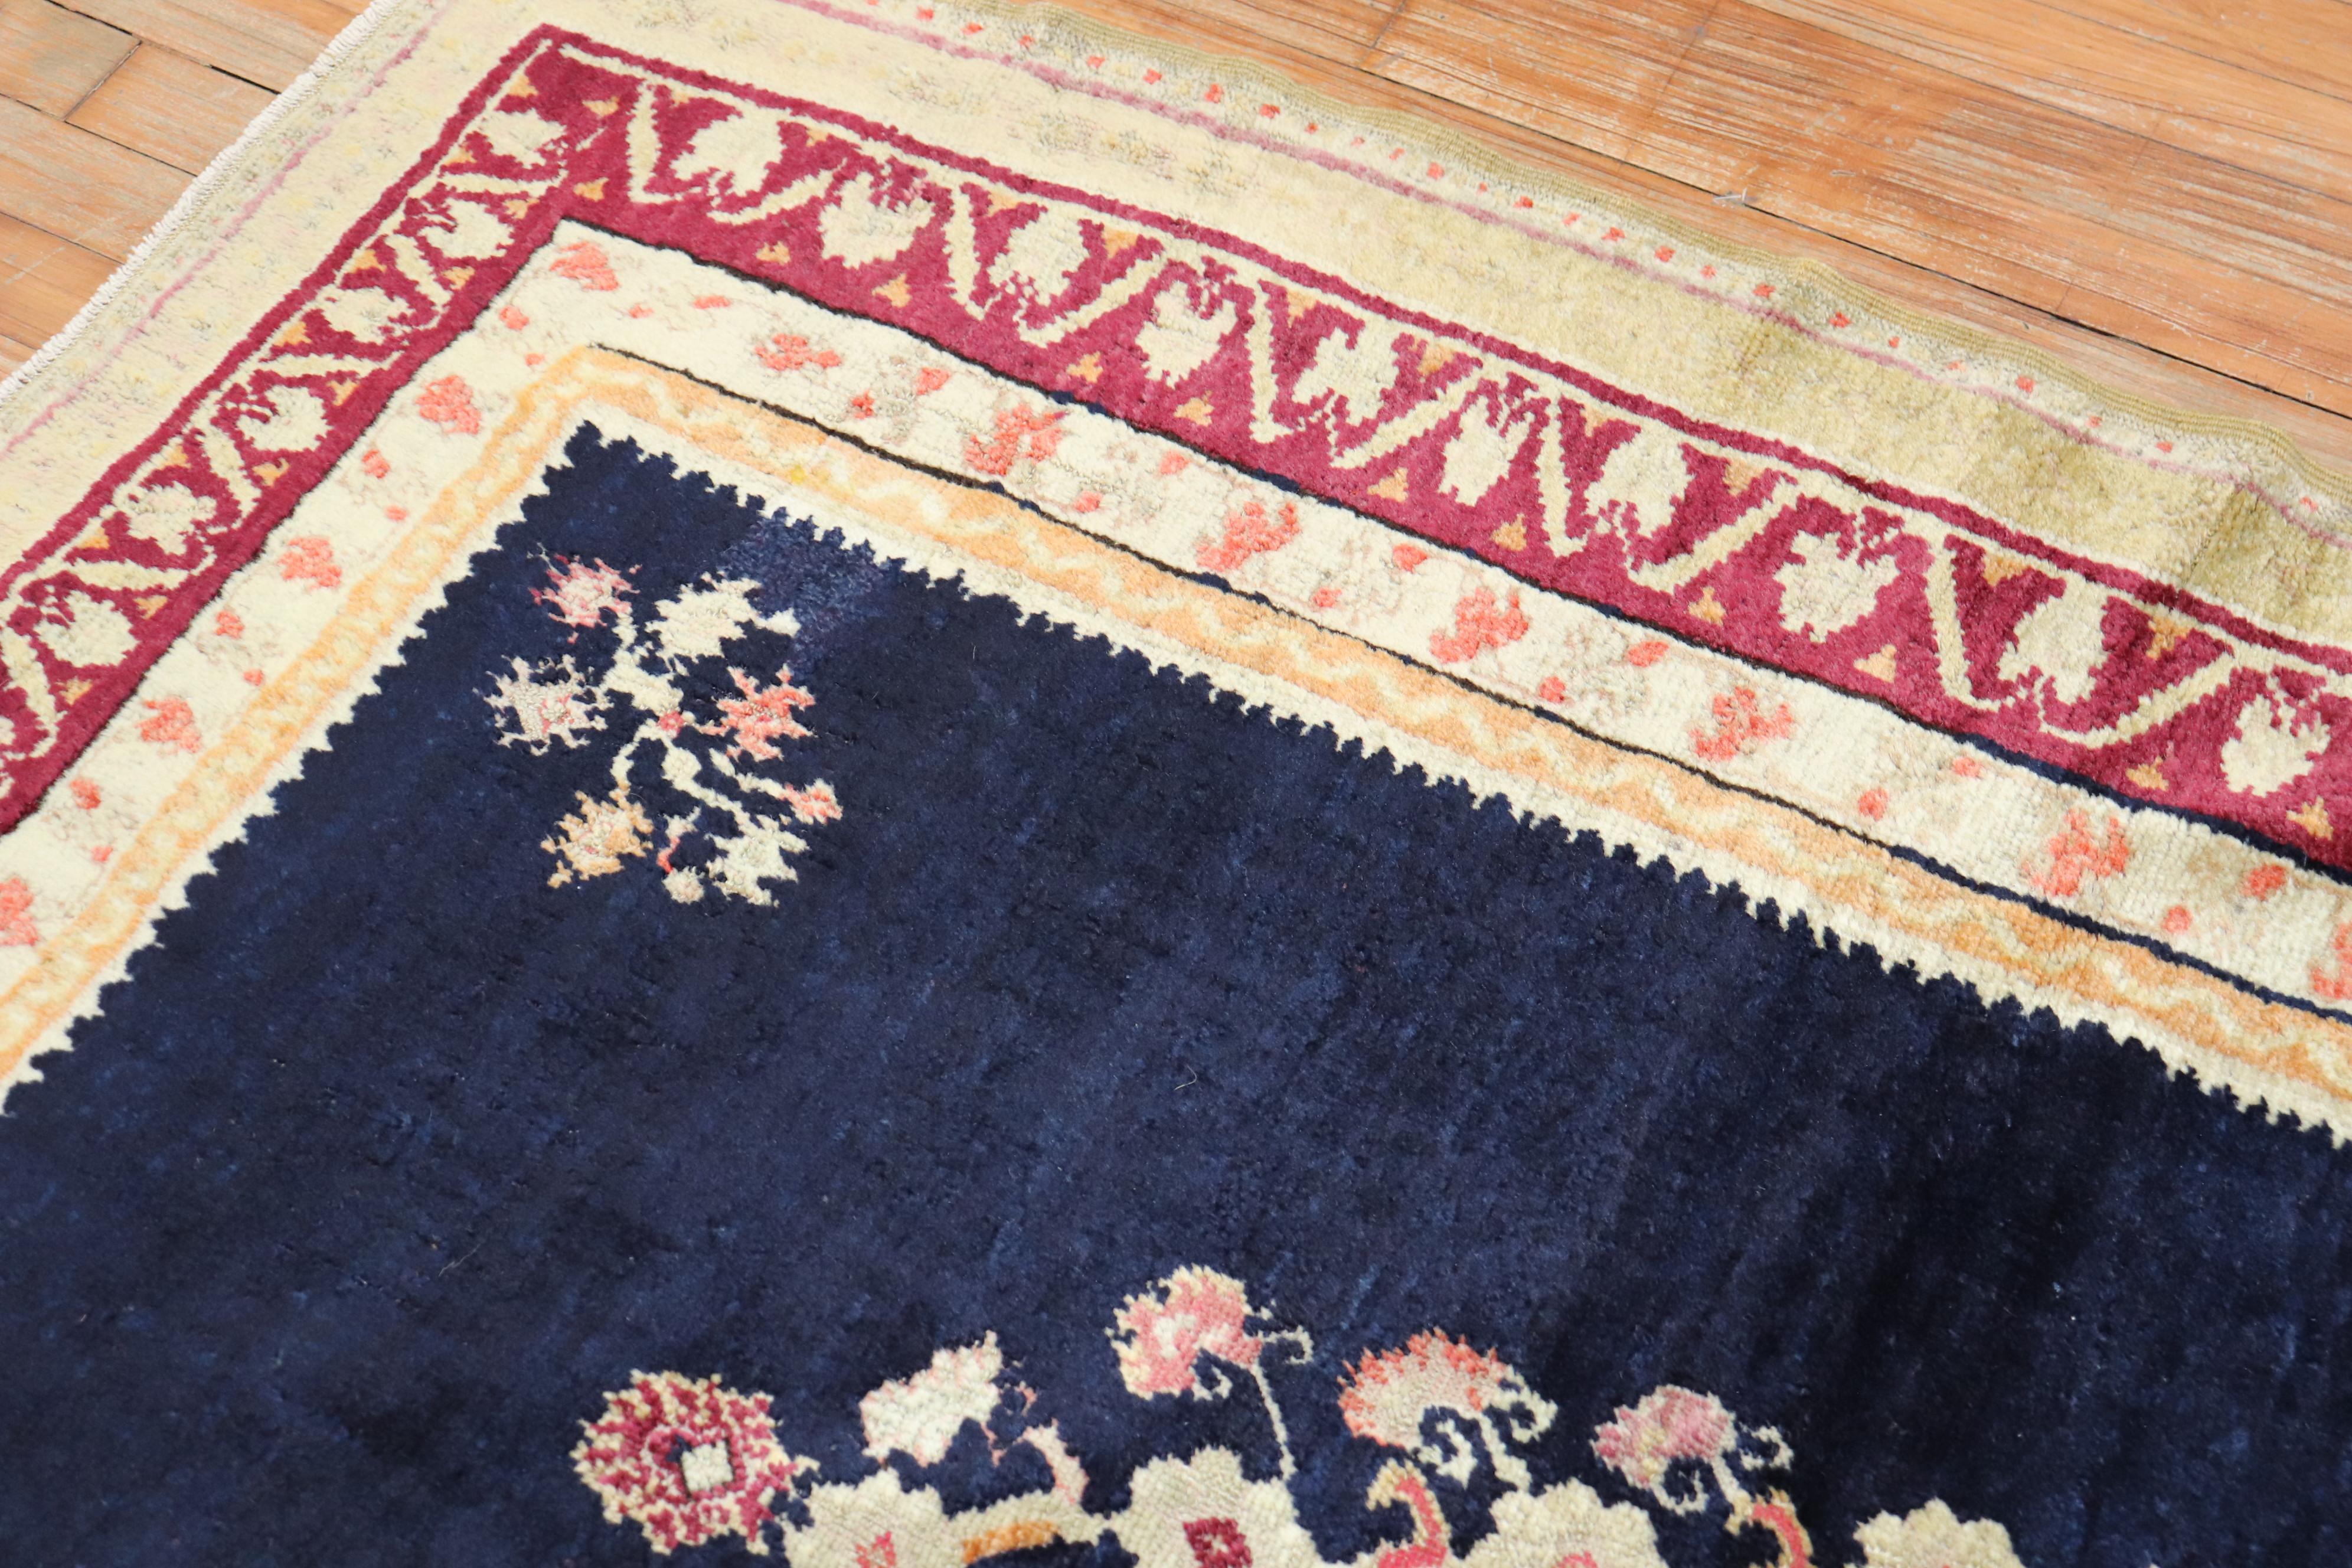 Elegant Antique Turkish Ghiordes Floral Rug, Early 20th Century For Sale 1